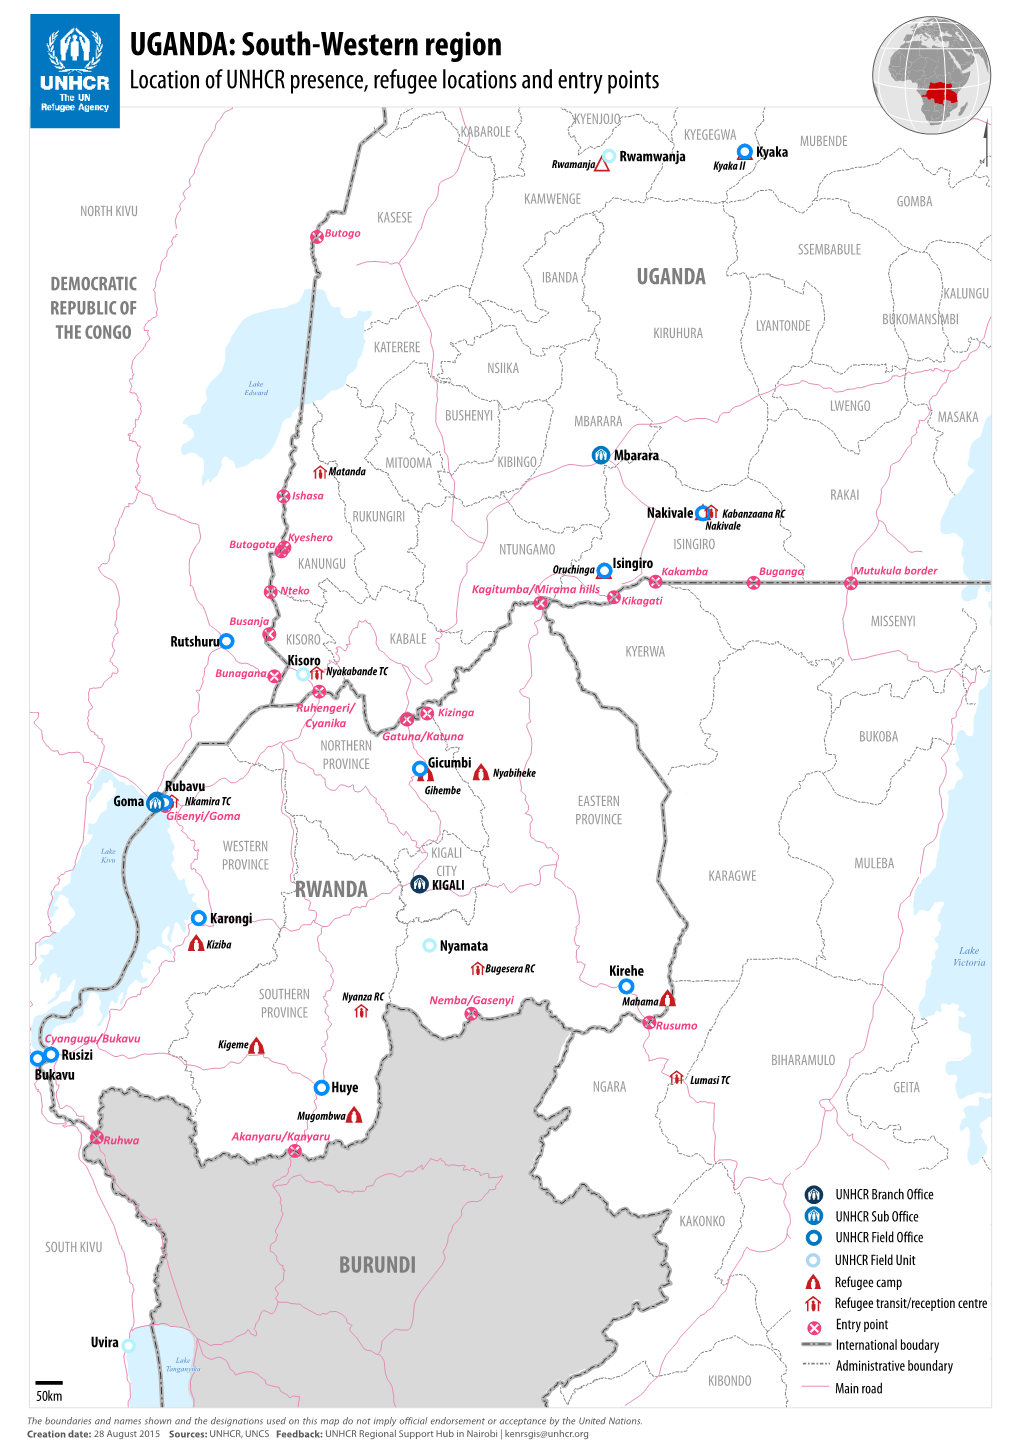 Location of UNHCR Presence, Refugee Locations and Entry Points